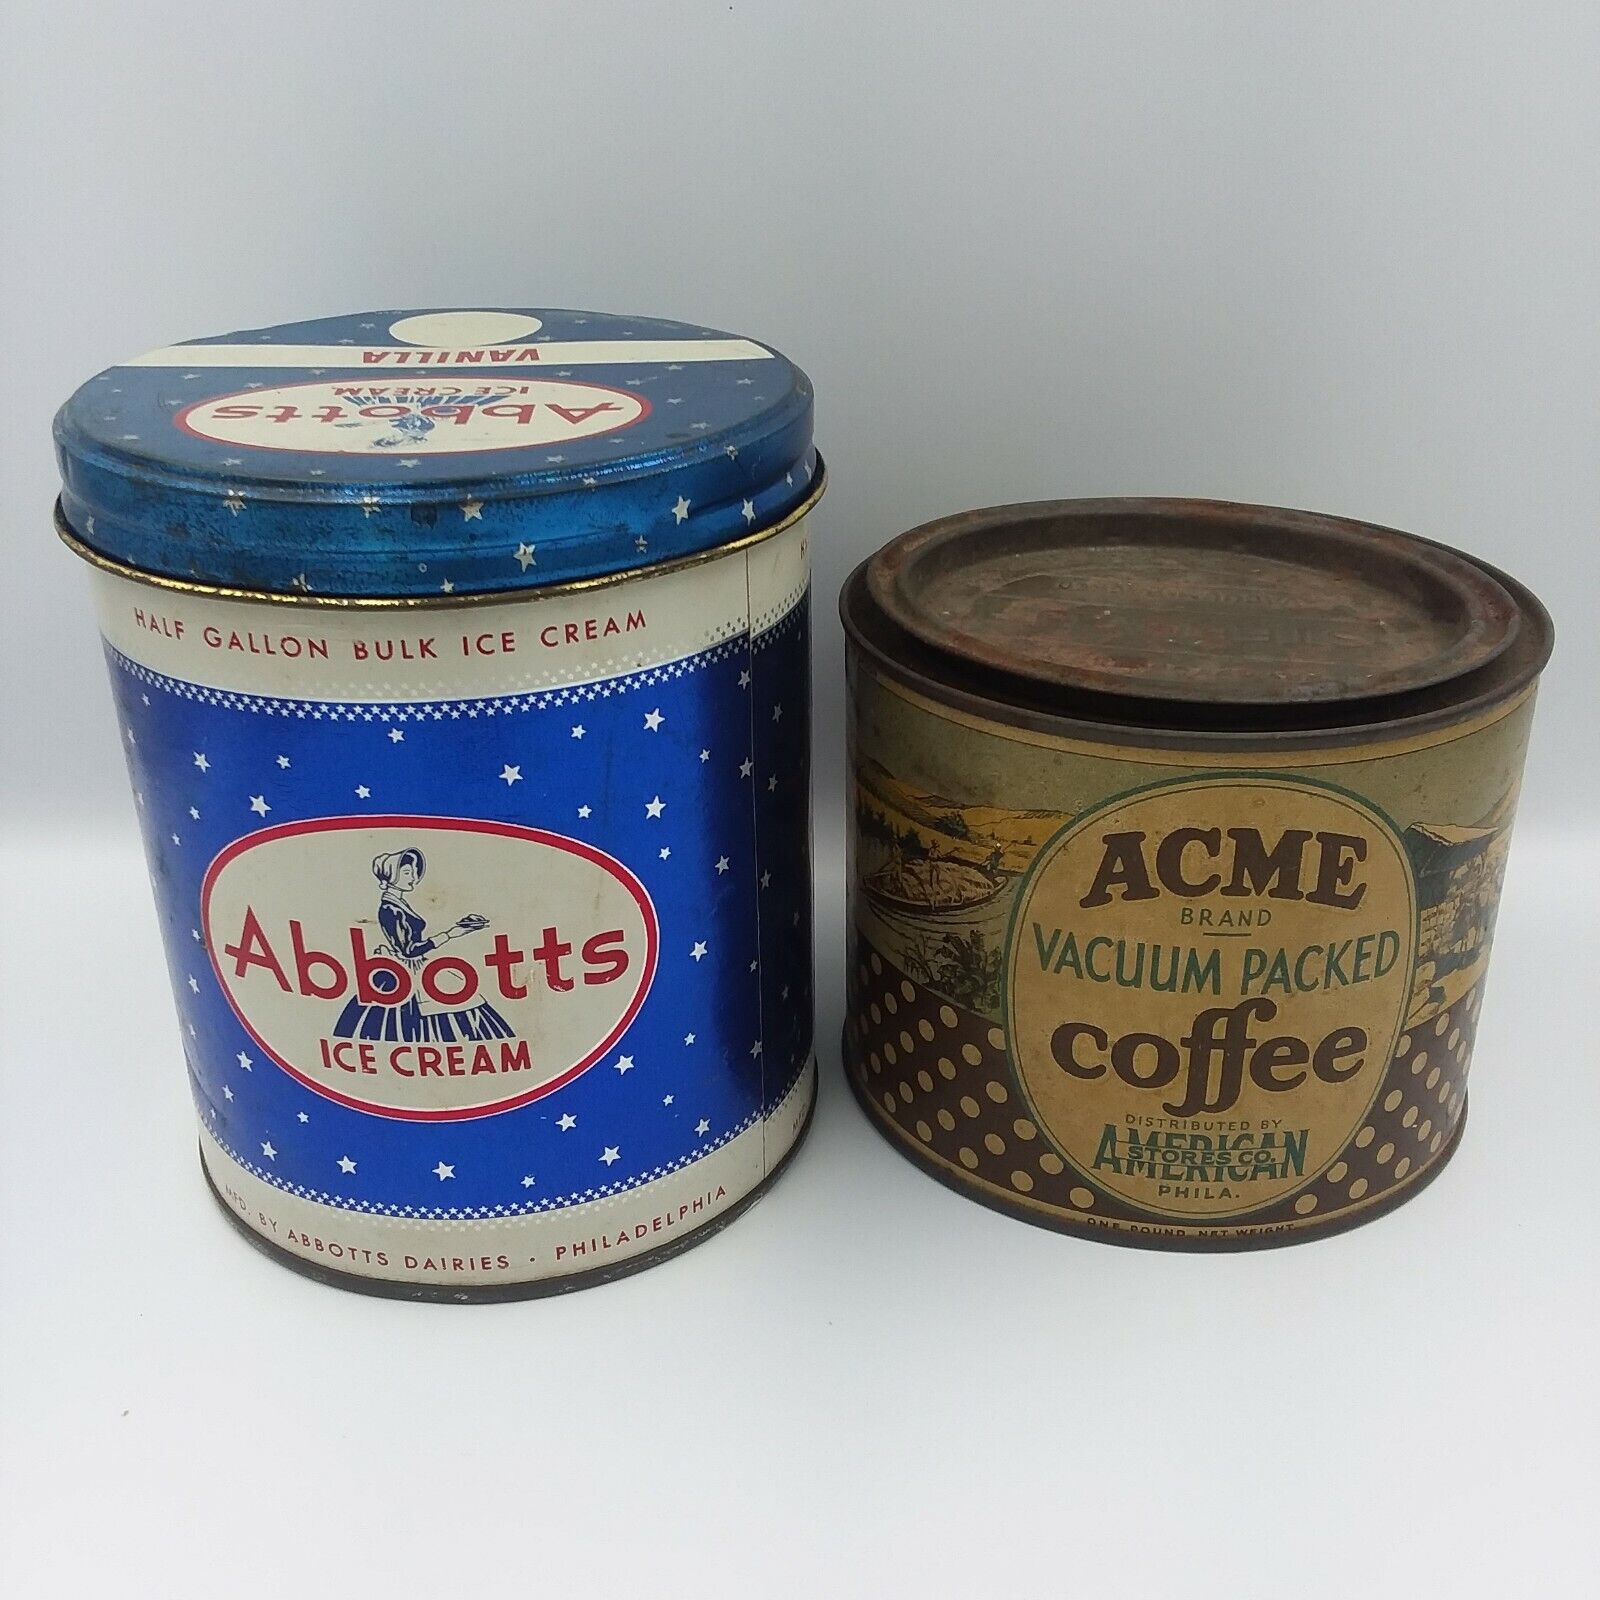 Vintage Abbott's Ice Cream Container & Acme Coffee Canister